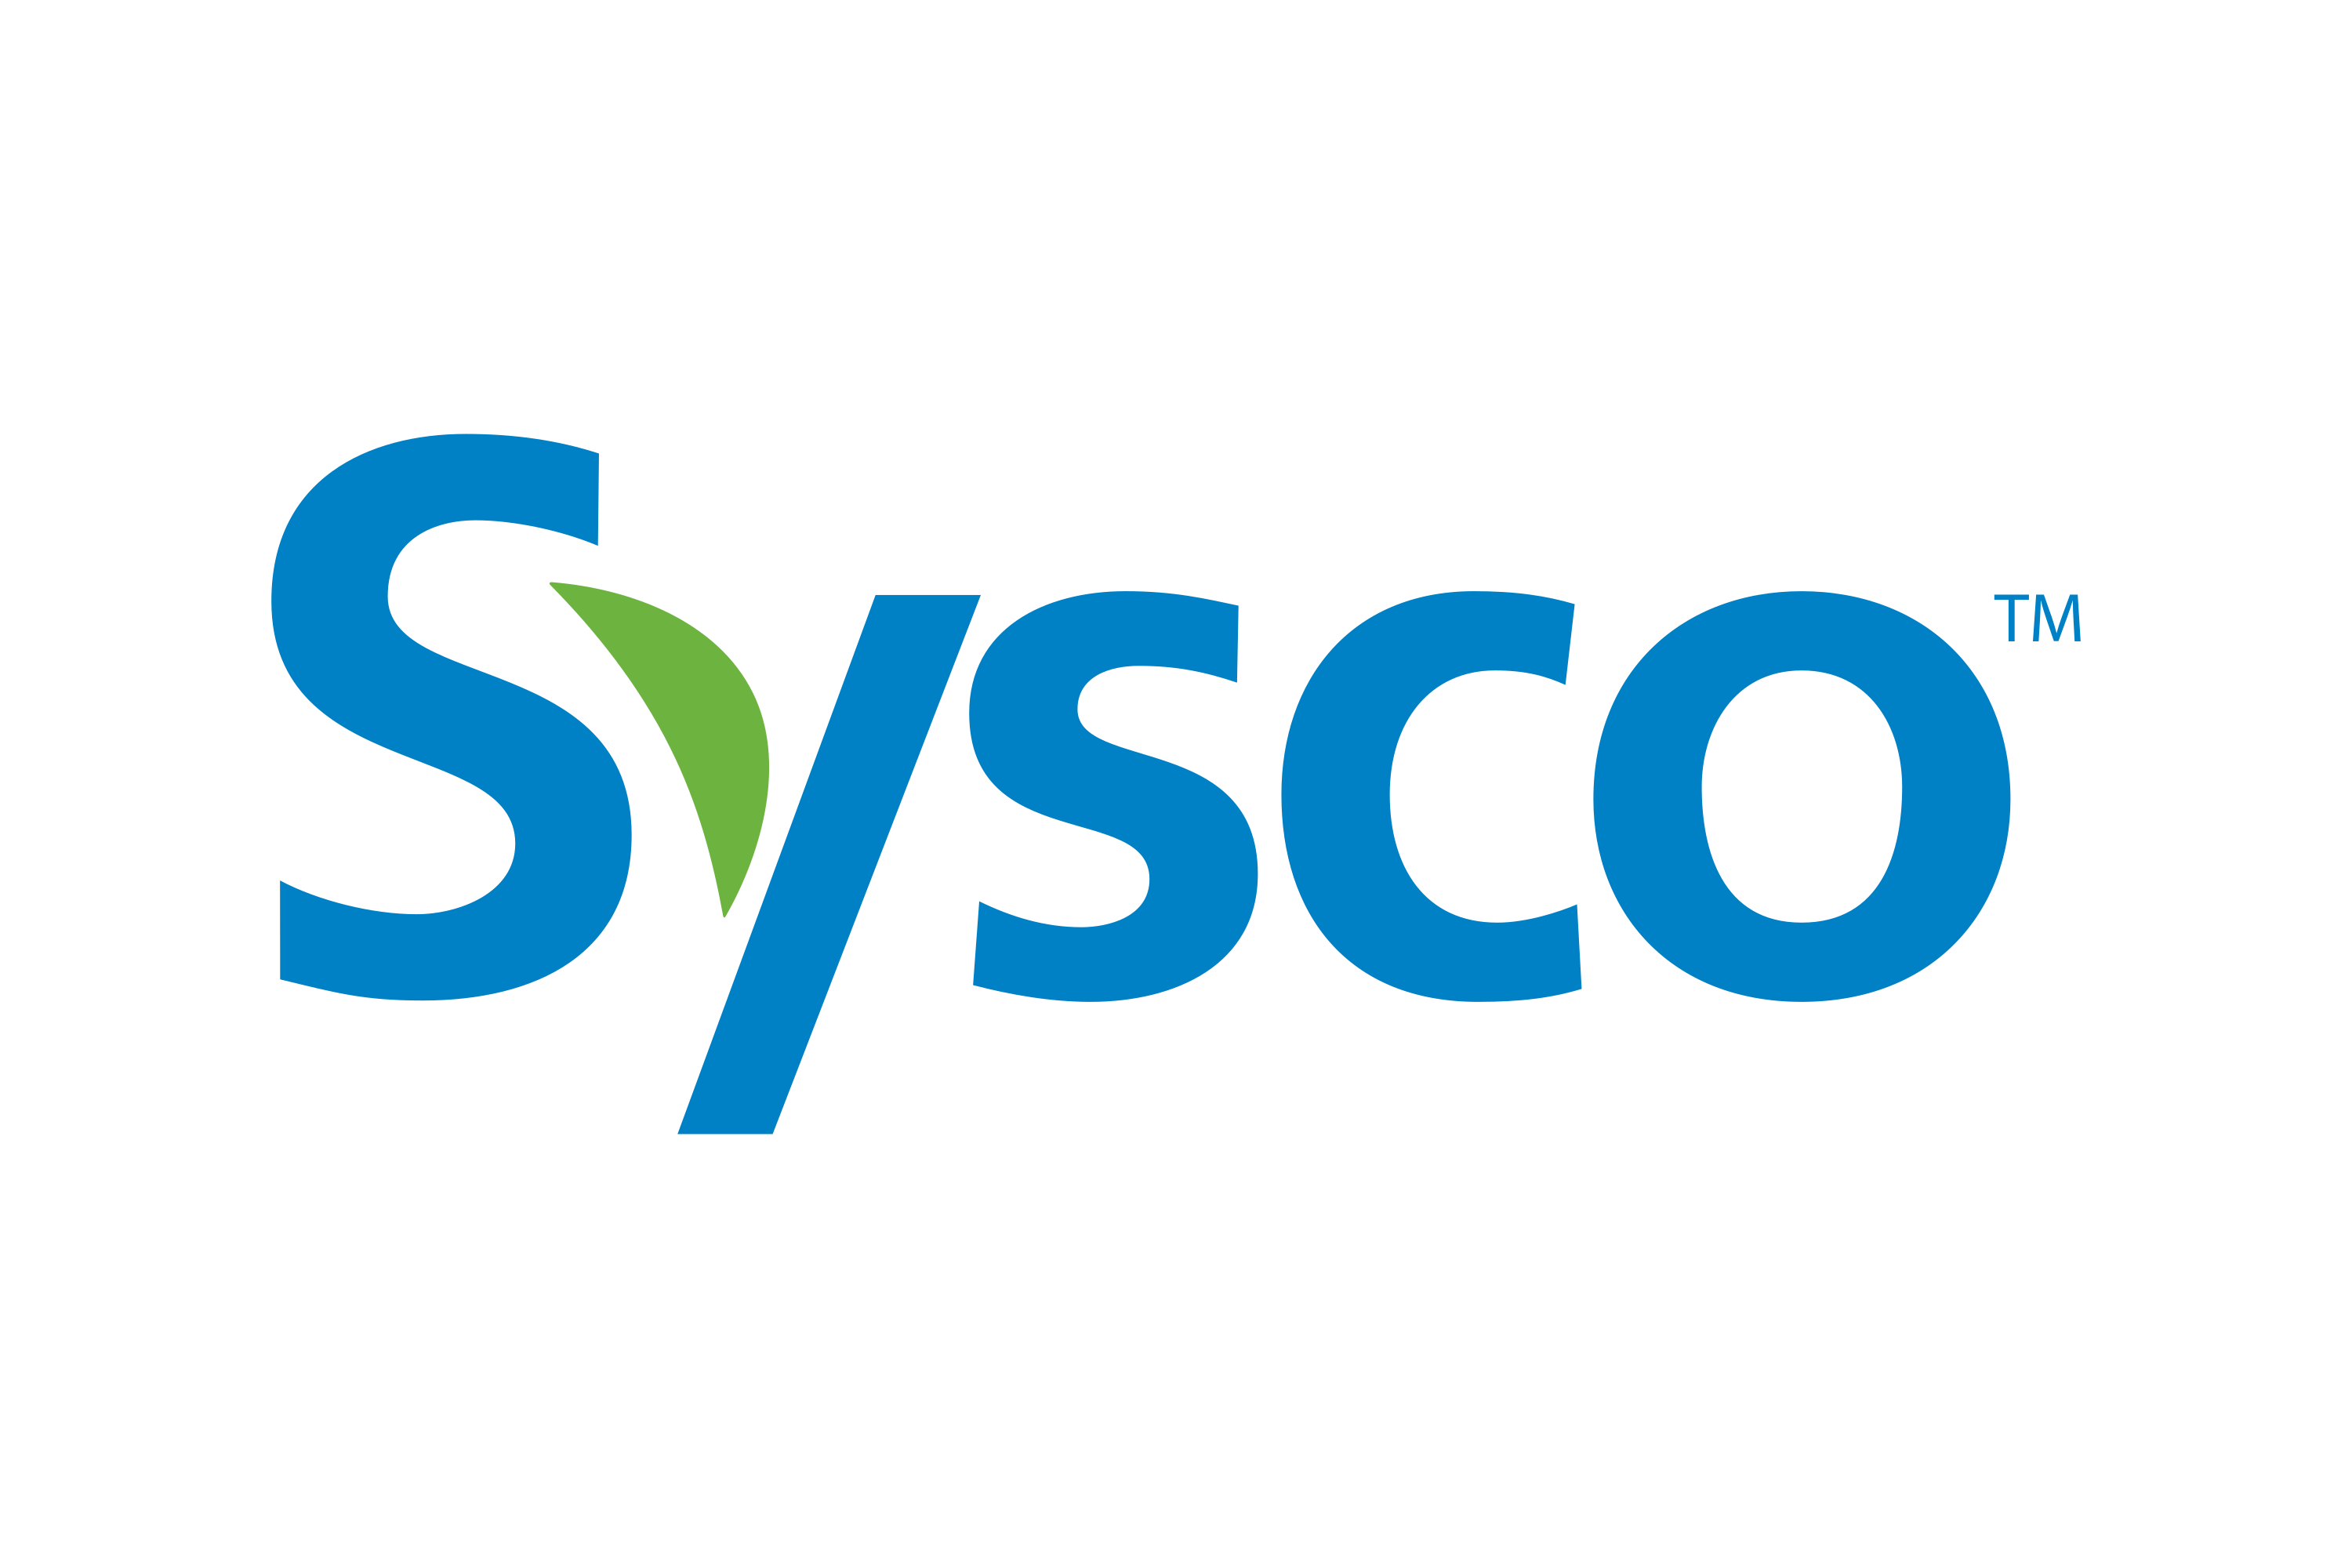 Download Sysco Logo in SVG Vector or PNG File Format - Logo.wine